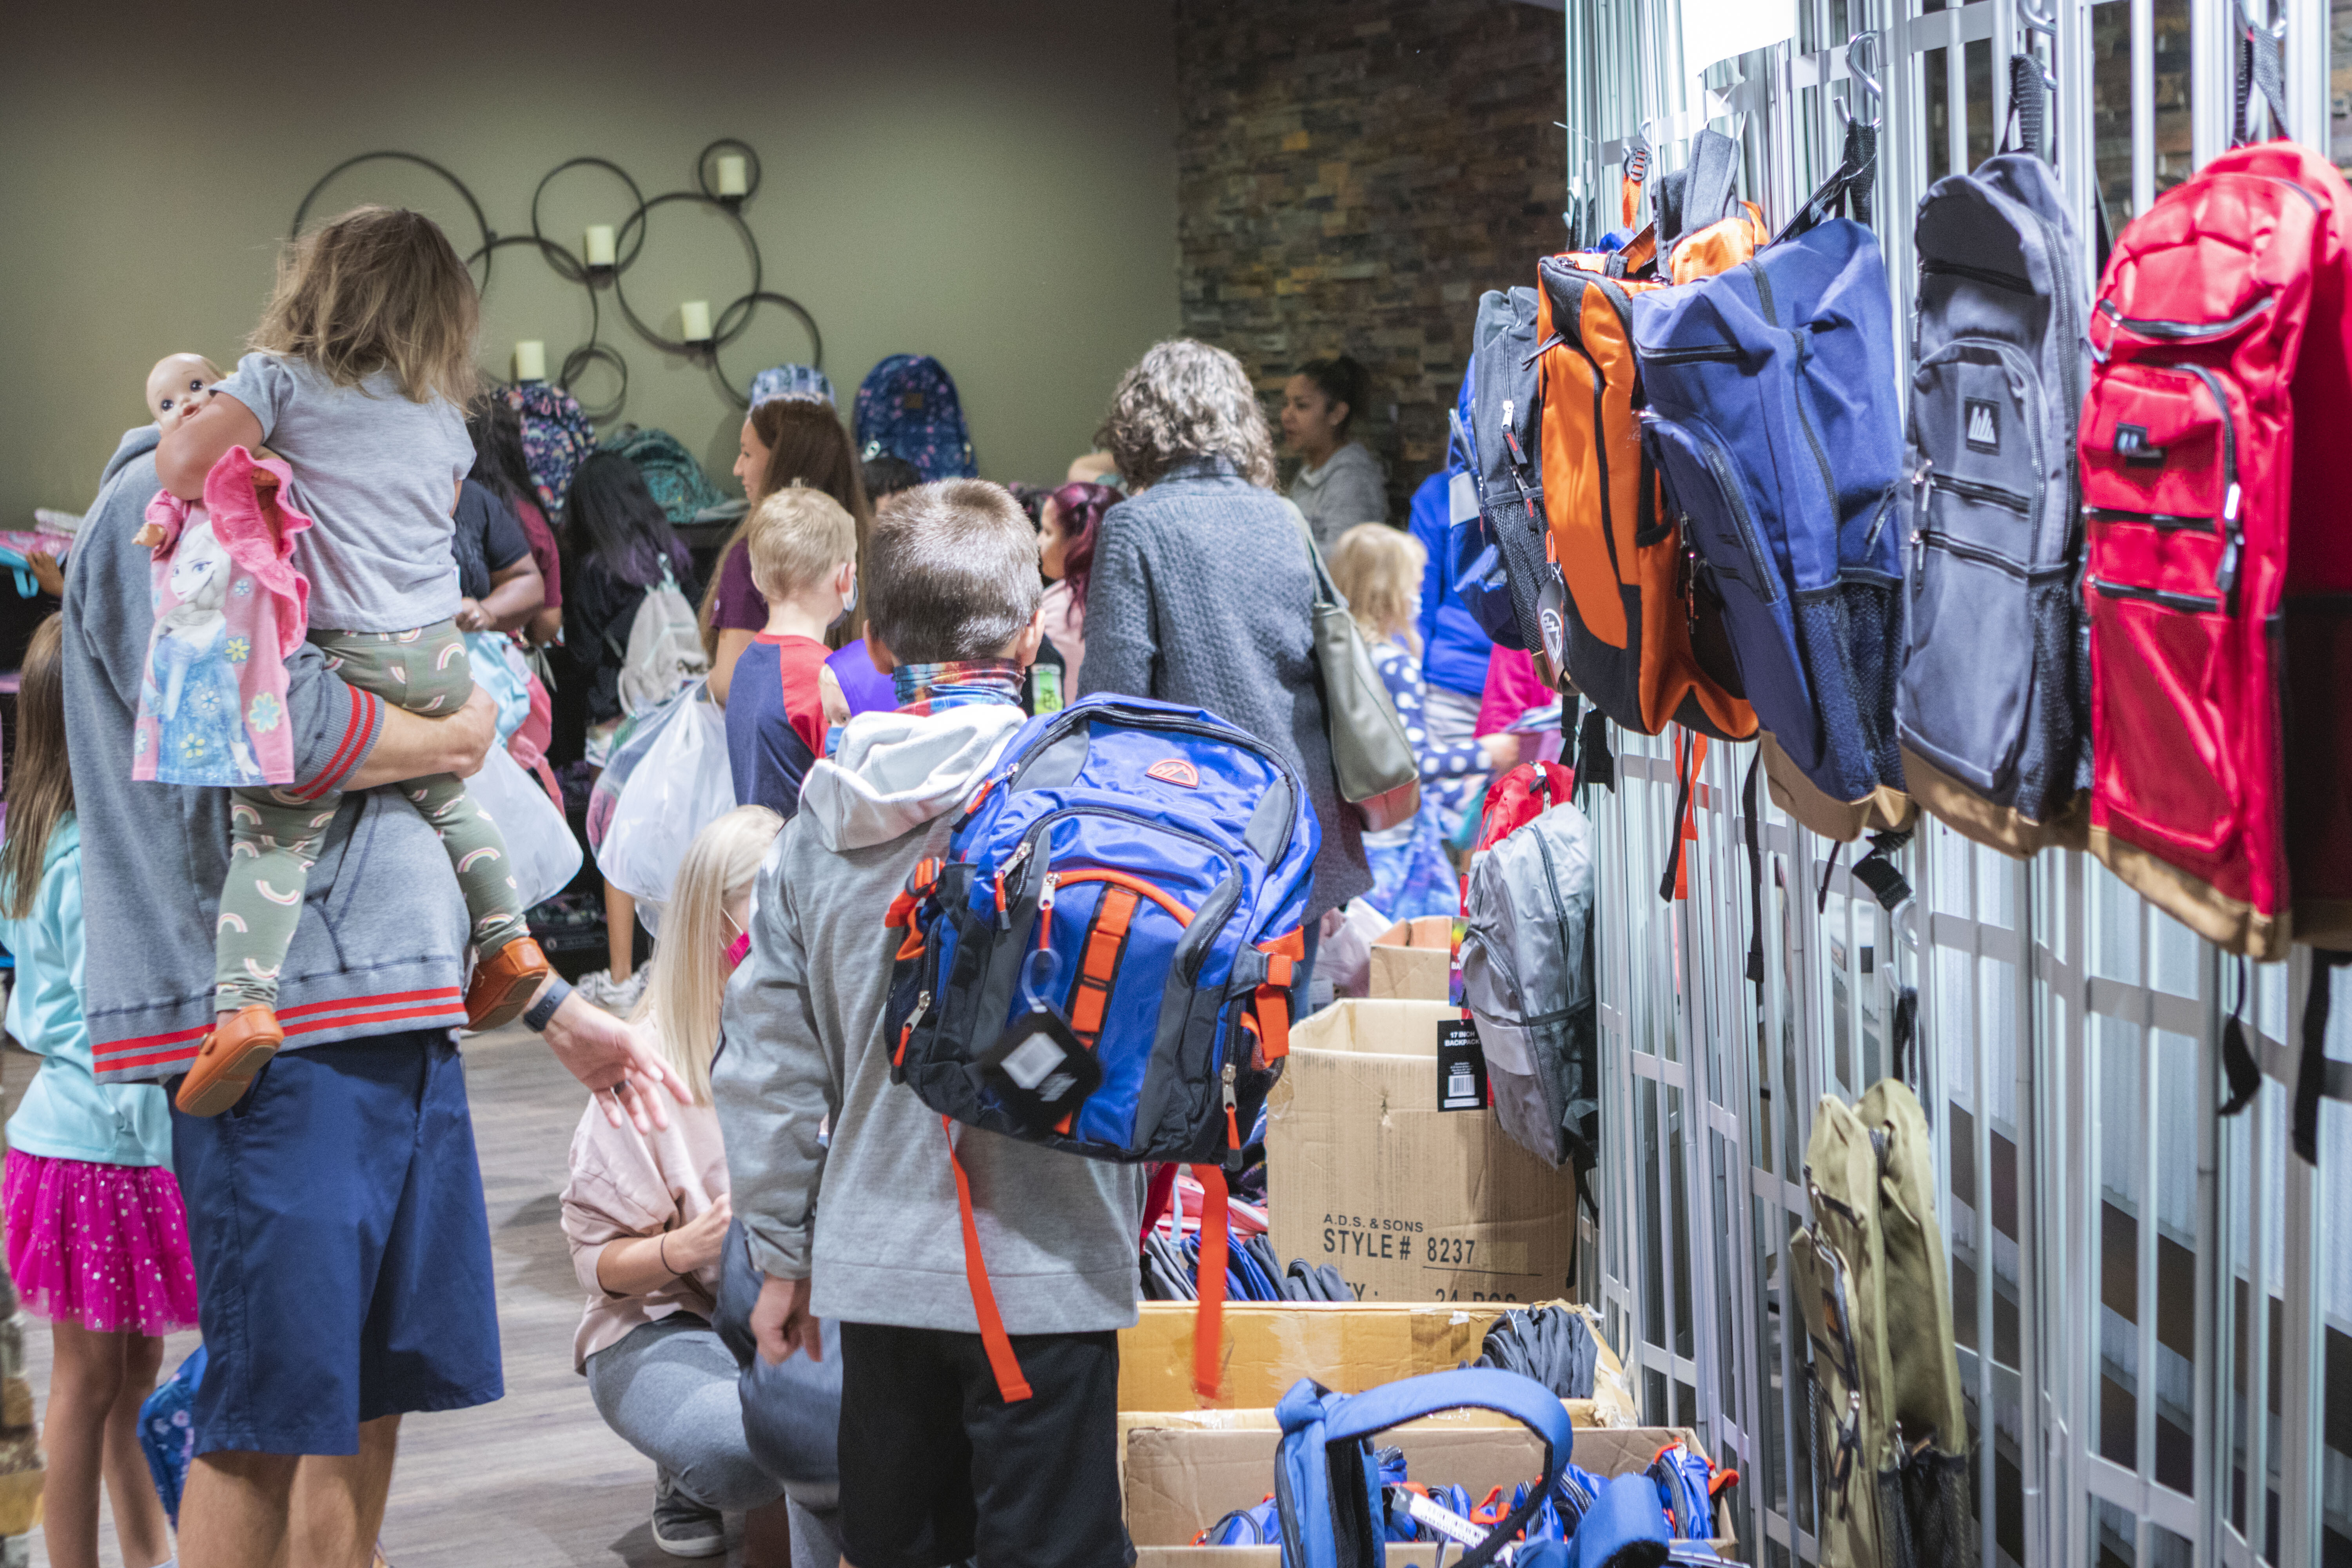 families-shopping-for-backpacks-at-school-a-palooza